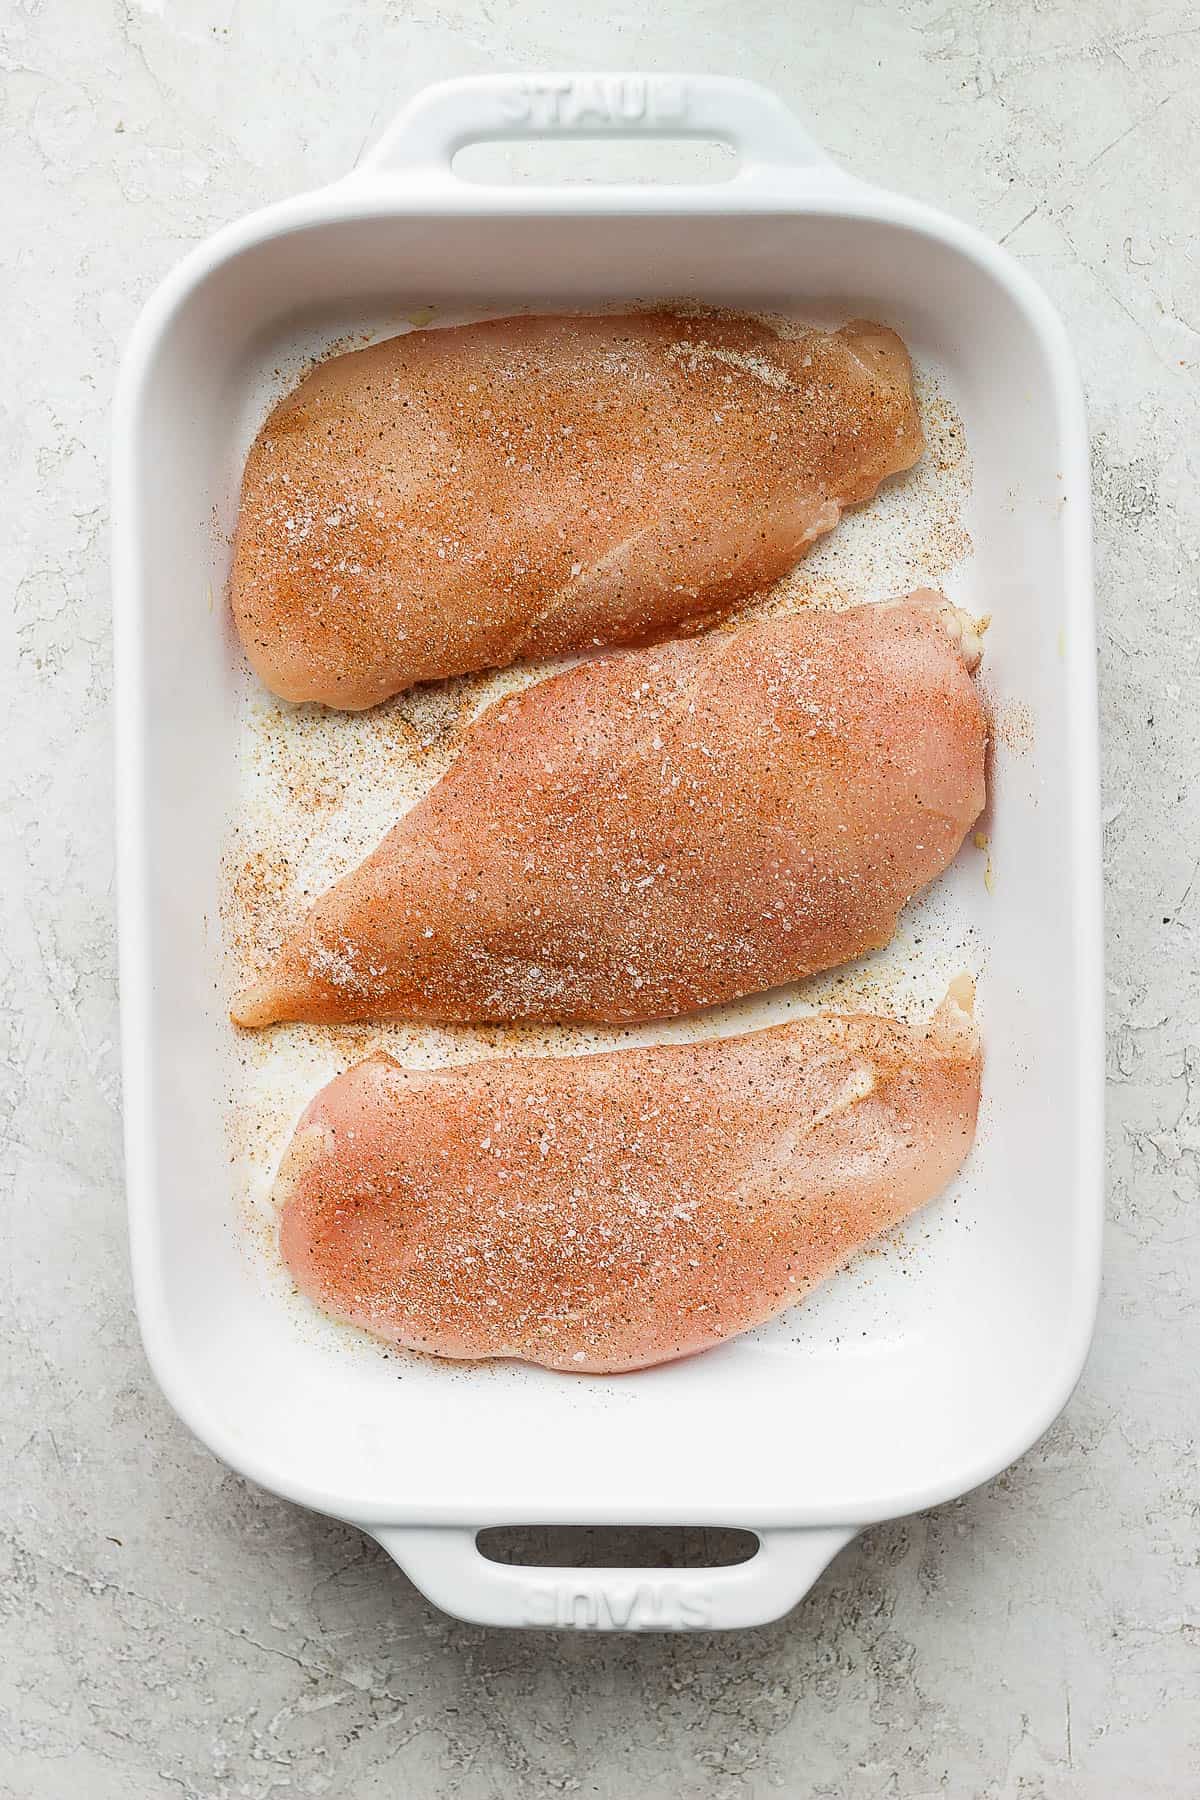 Chicken breasts covered in olive oil and seasoned with the seasoning mixture.